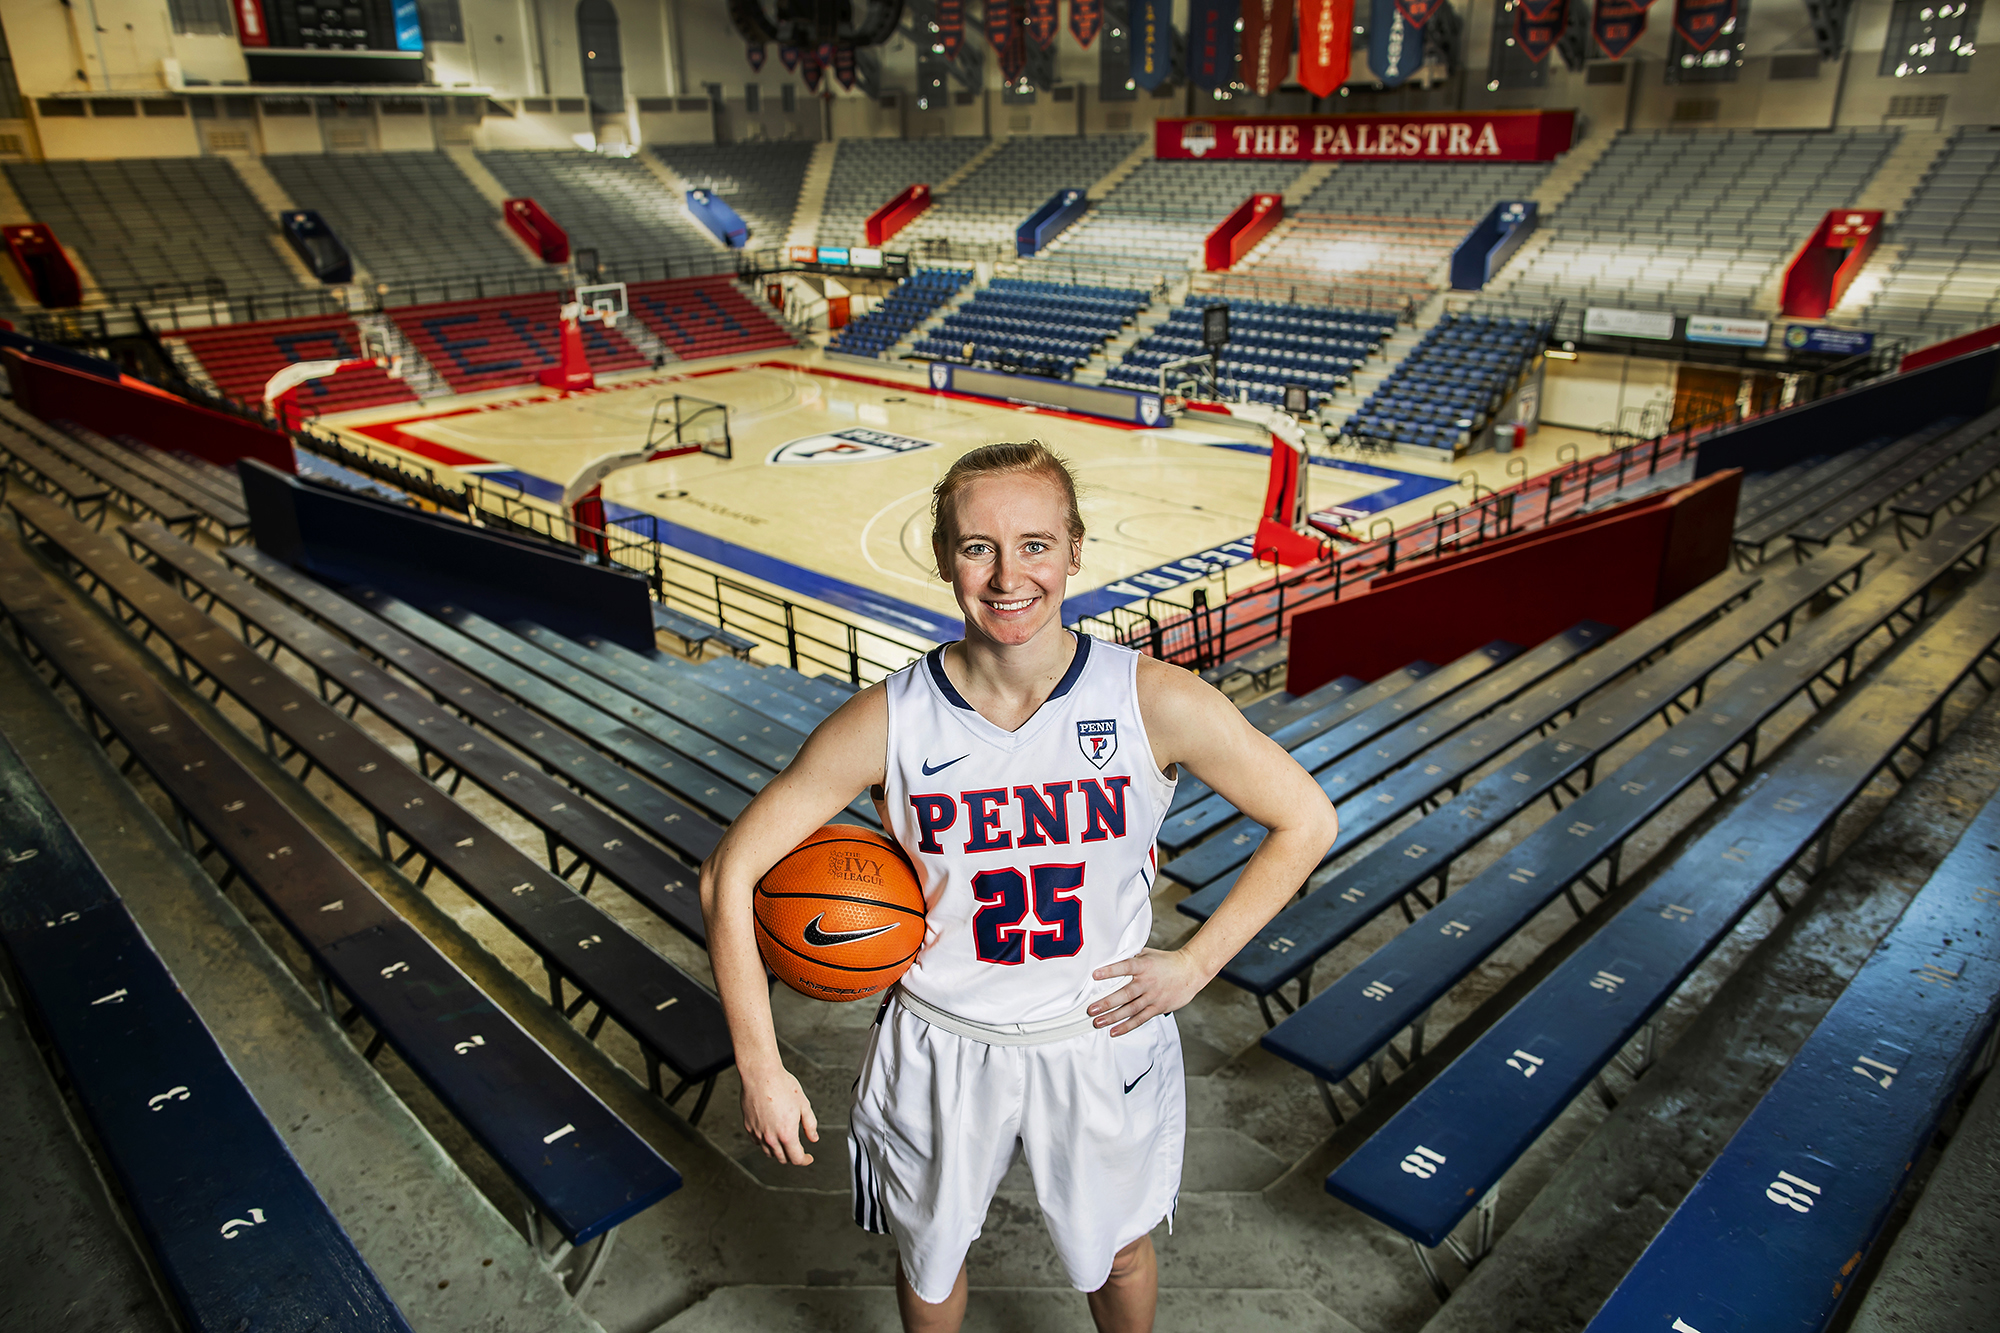 Ashley Russell of the women's basketball team poses with a ball in the Palestra bleachers.